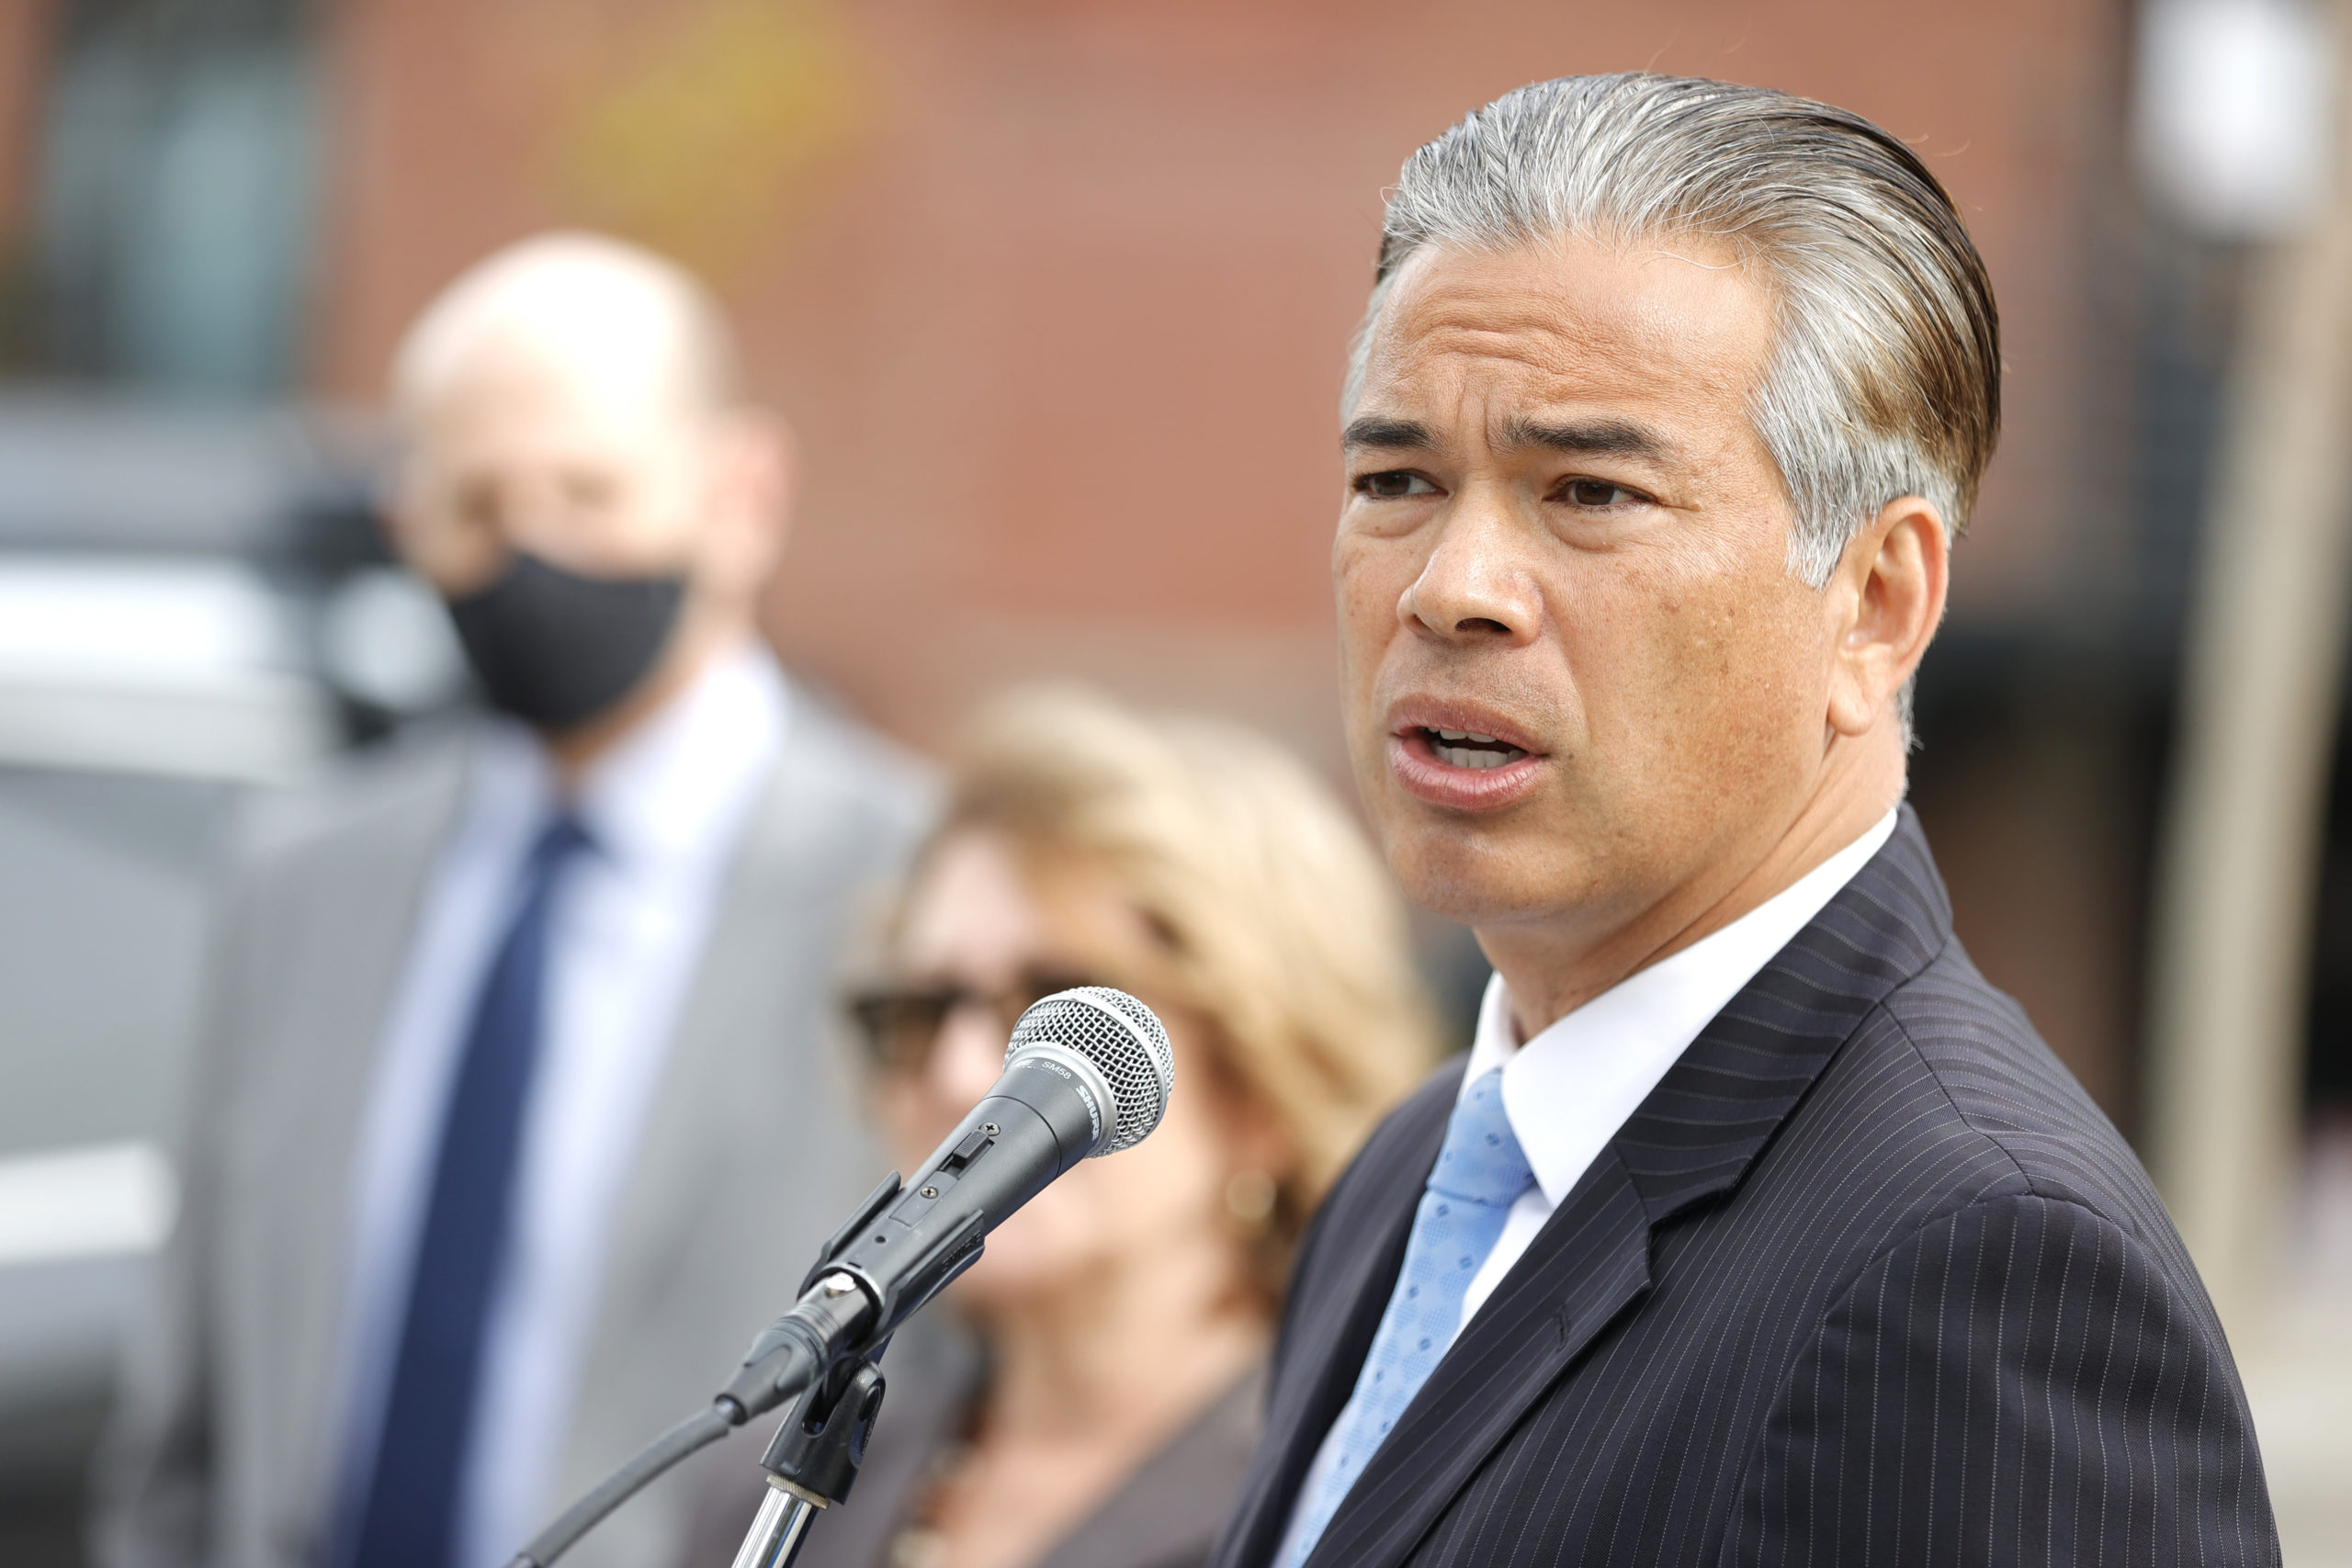 SAN FRANCISCO, CA - NOVEMBER 15: California Attorney General Rob Bonta speaks during a press conference outside an Amazon distribution facility on November 15, 2021 in San Francisco, California.  (Justin Sullivan/Getty Images)